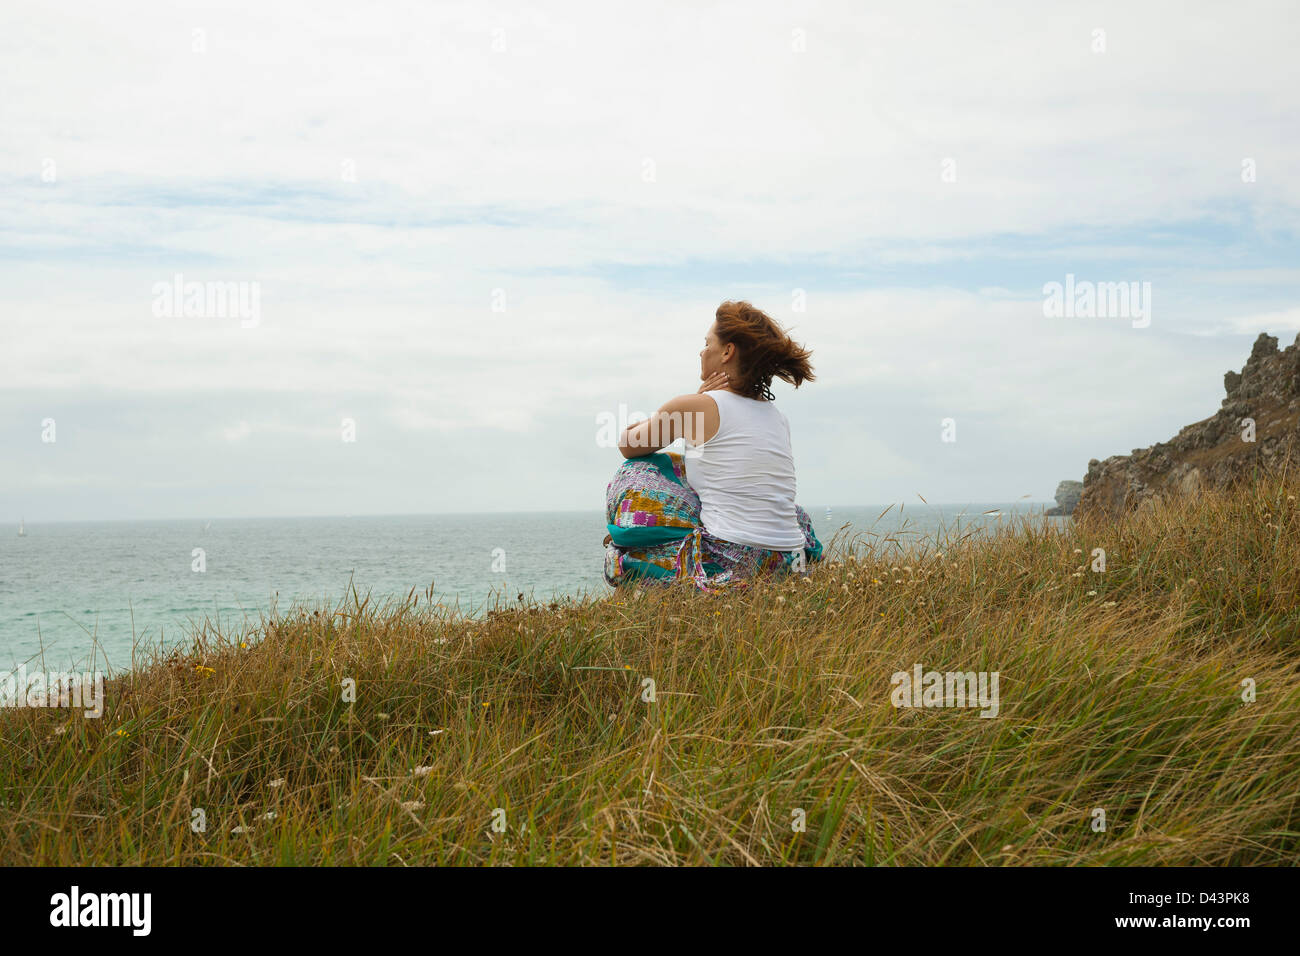 Woman Sitting and Looking into the Distance at the Beach, Camaret-sur-Mer, Crozon Peninsula, Finistere, Brittany, France Stock Photo